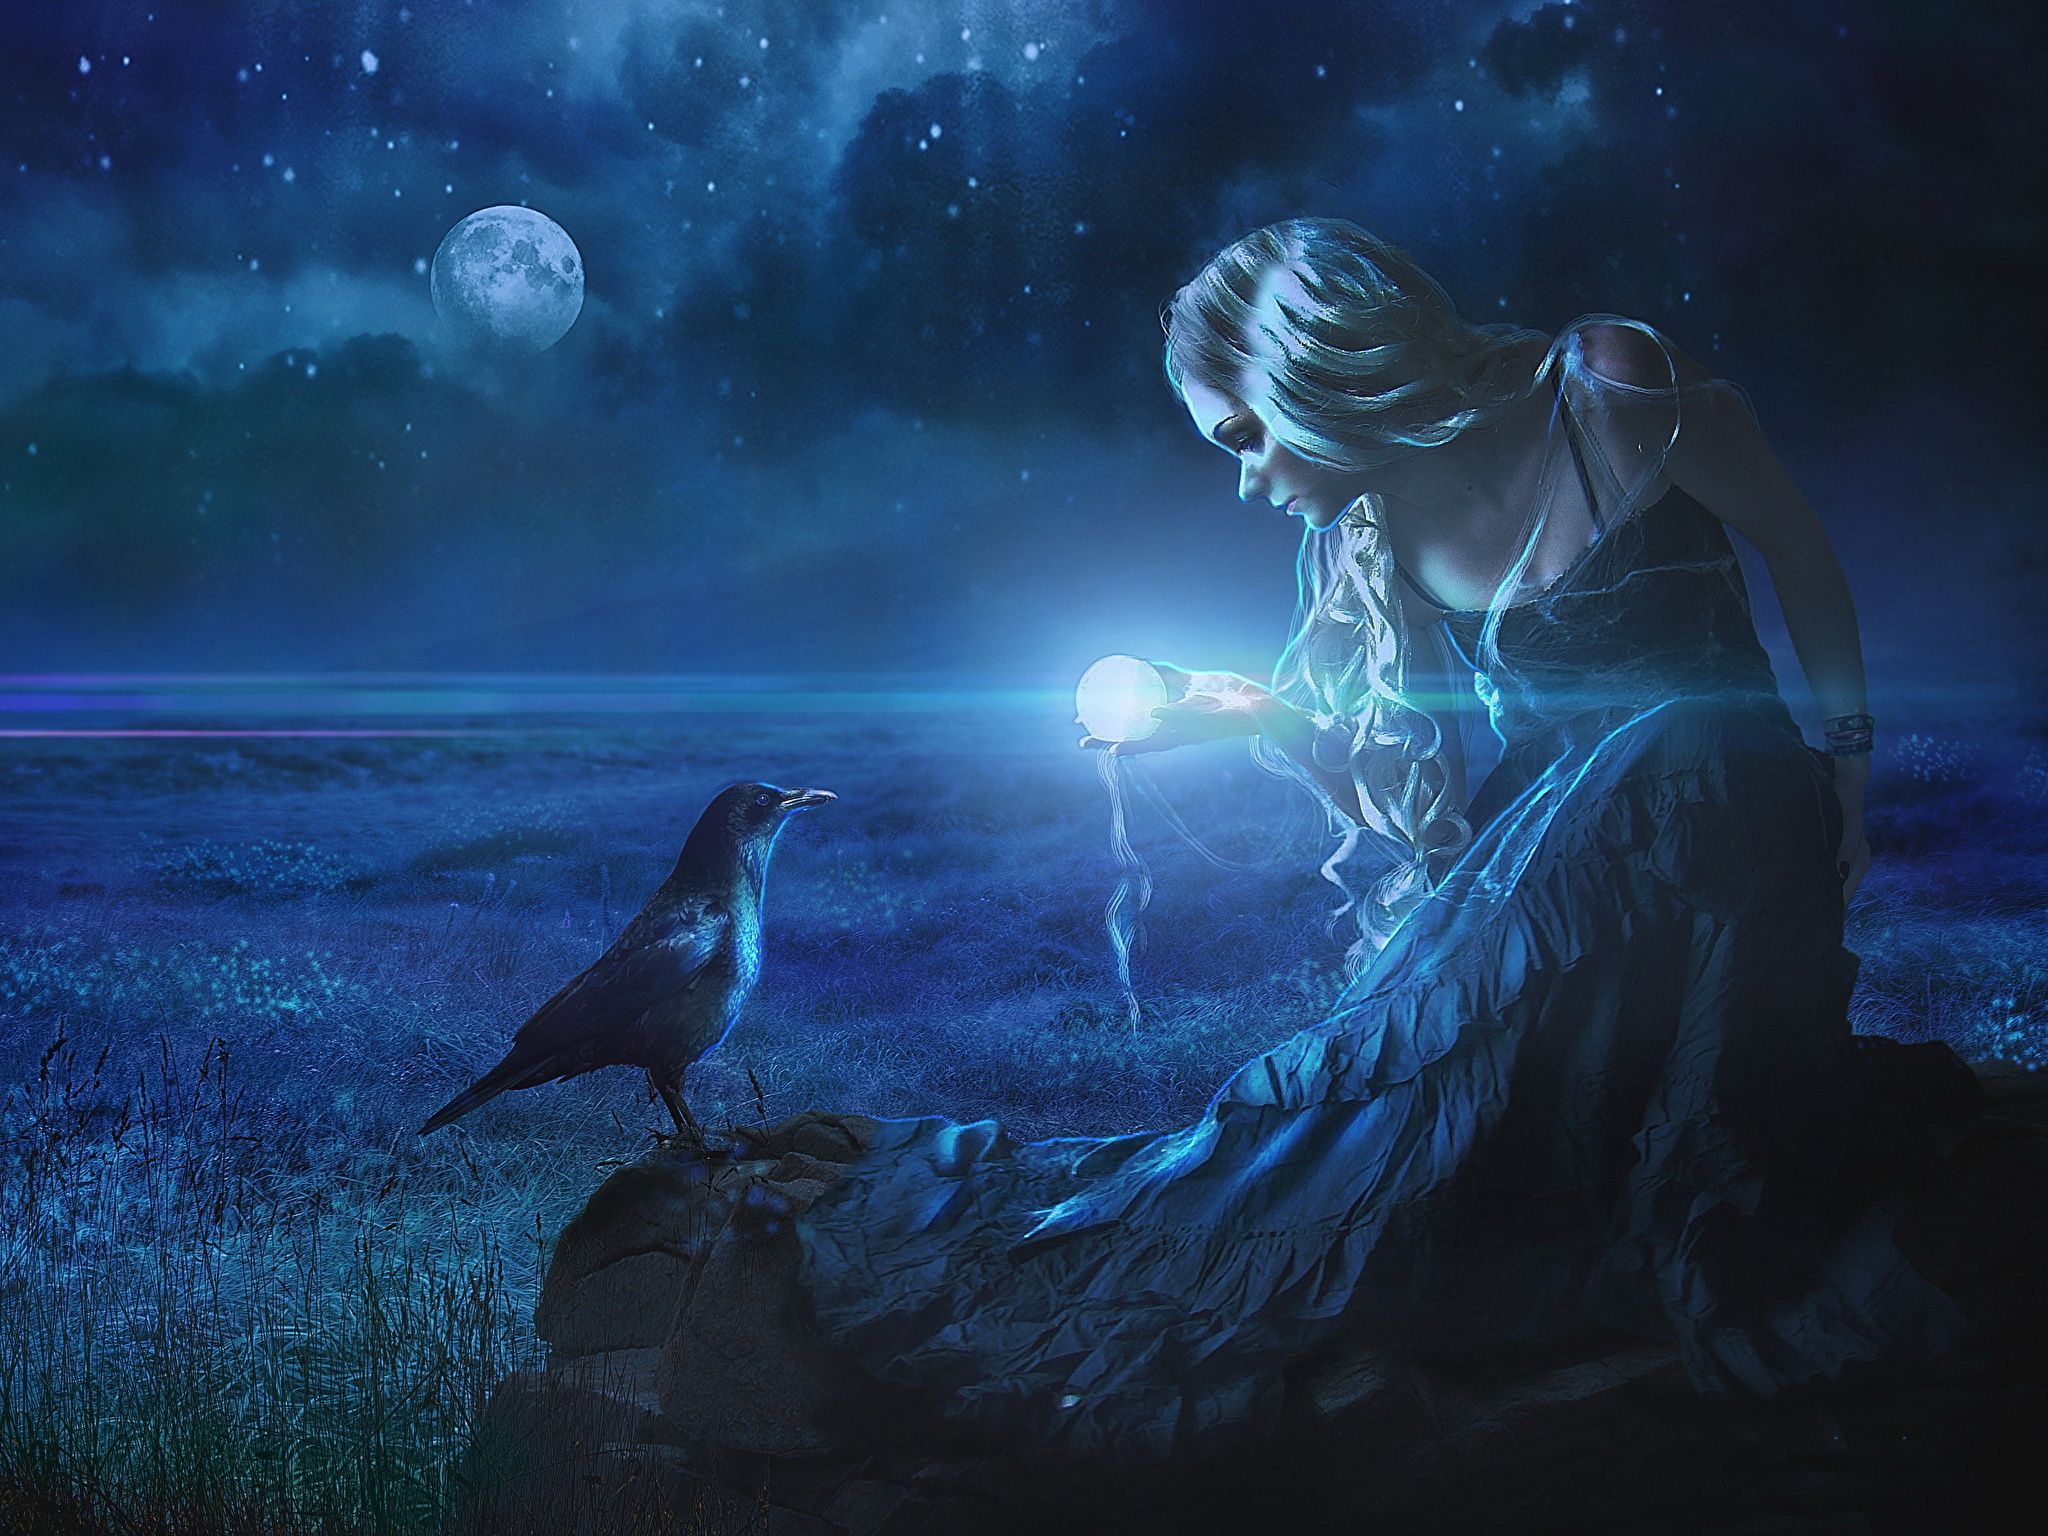 Picture Crows Magic Blonde girl Fantasy Moon night time 2048x1536. Fantasy, Art, New art